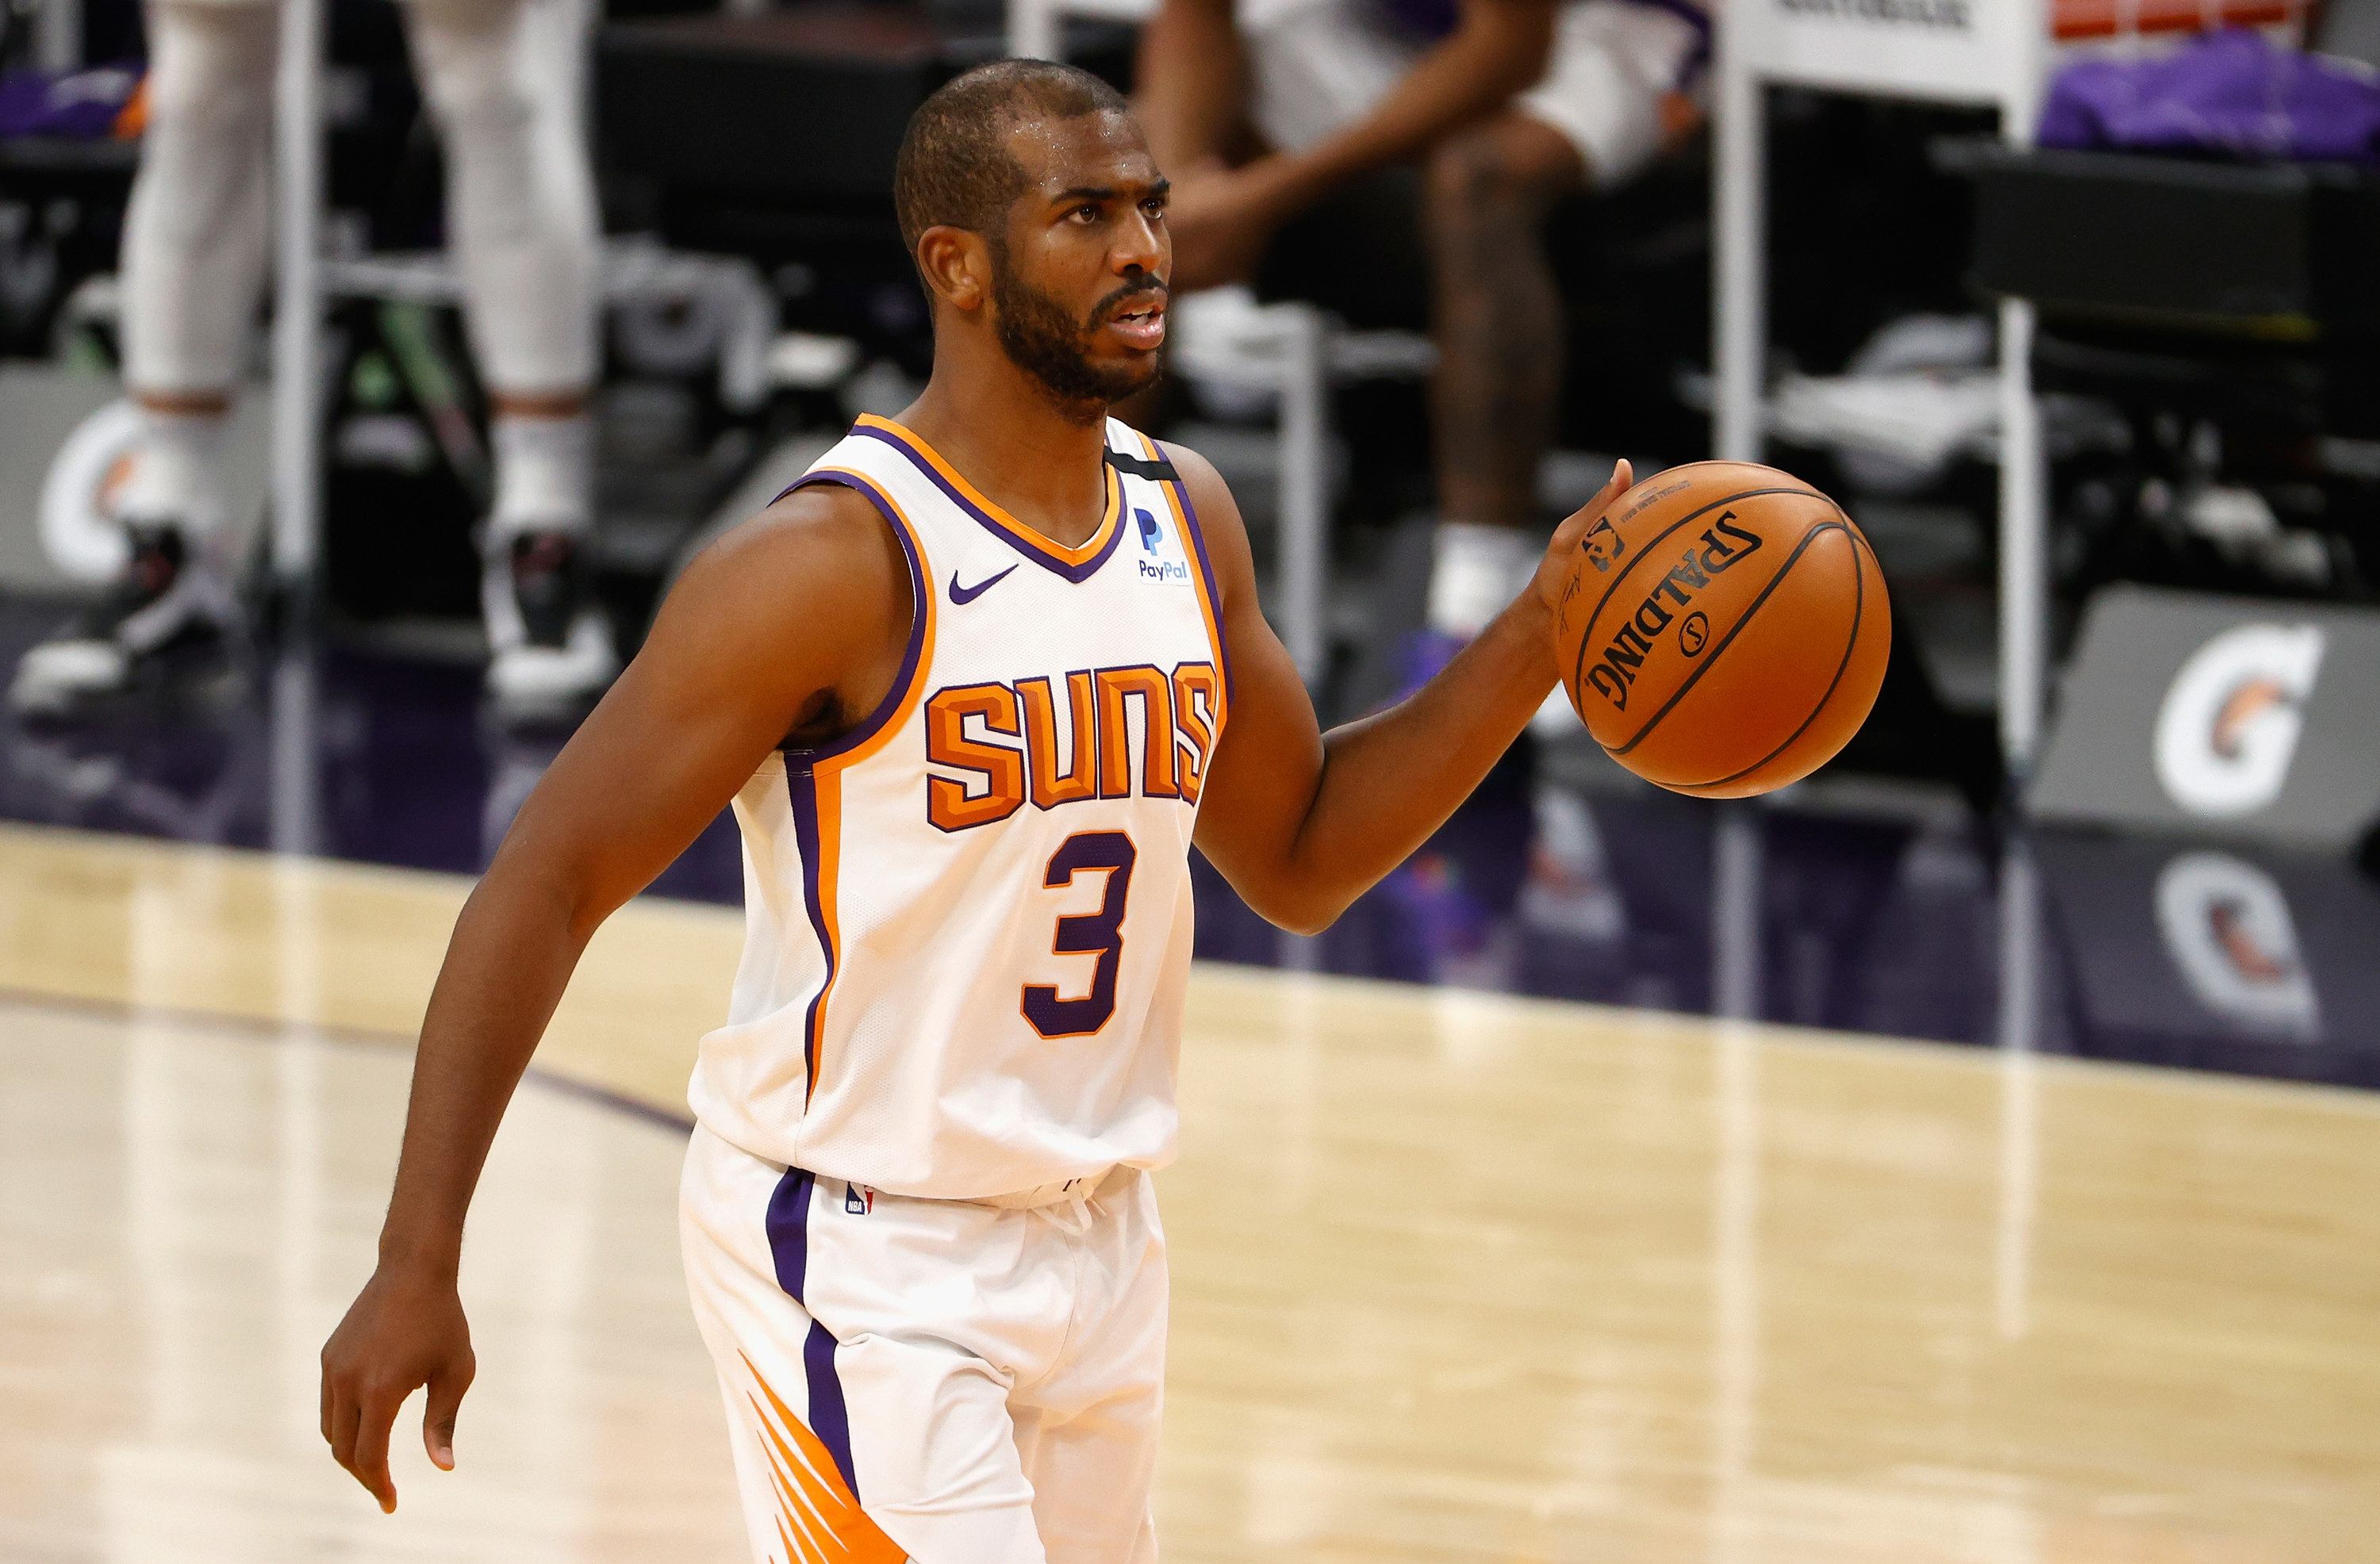 White Suns jersey with orange lettering and purple numbers